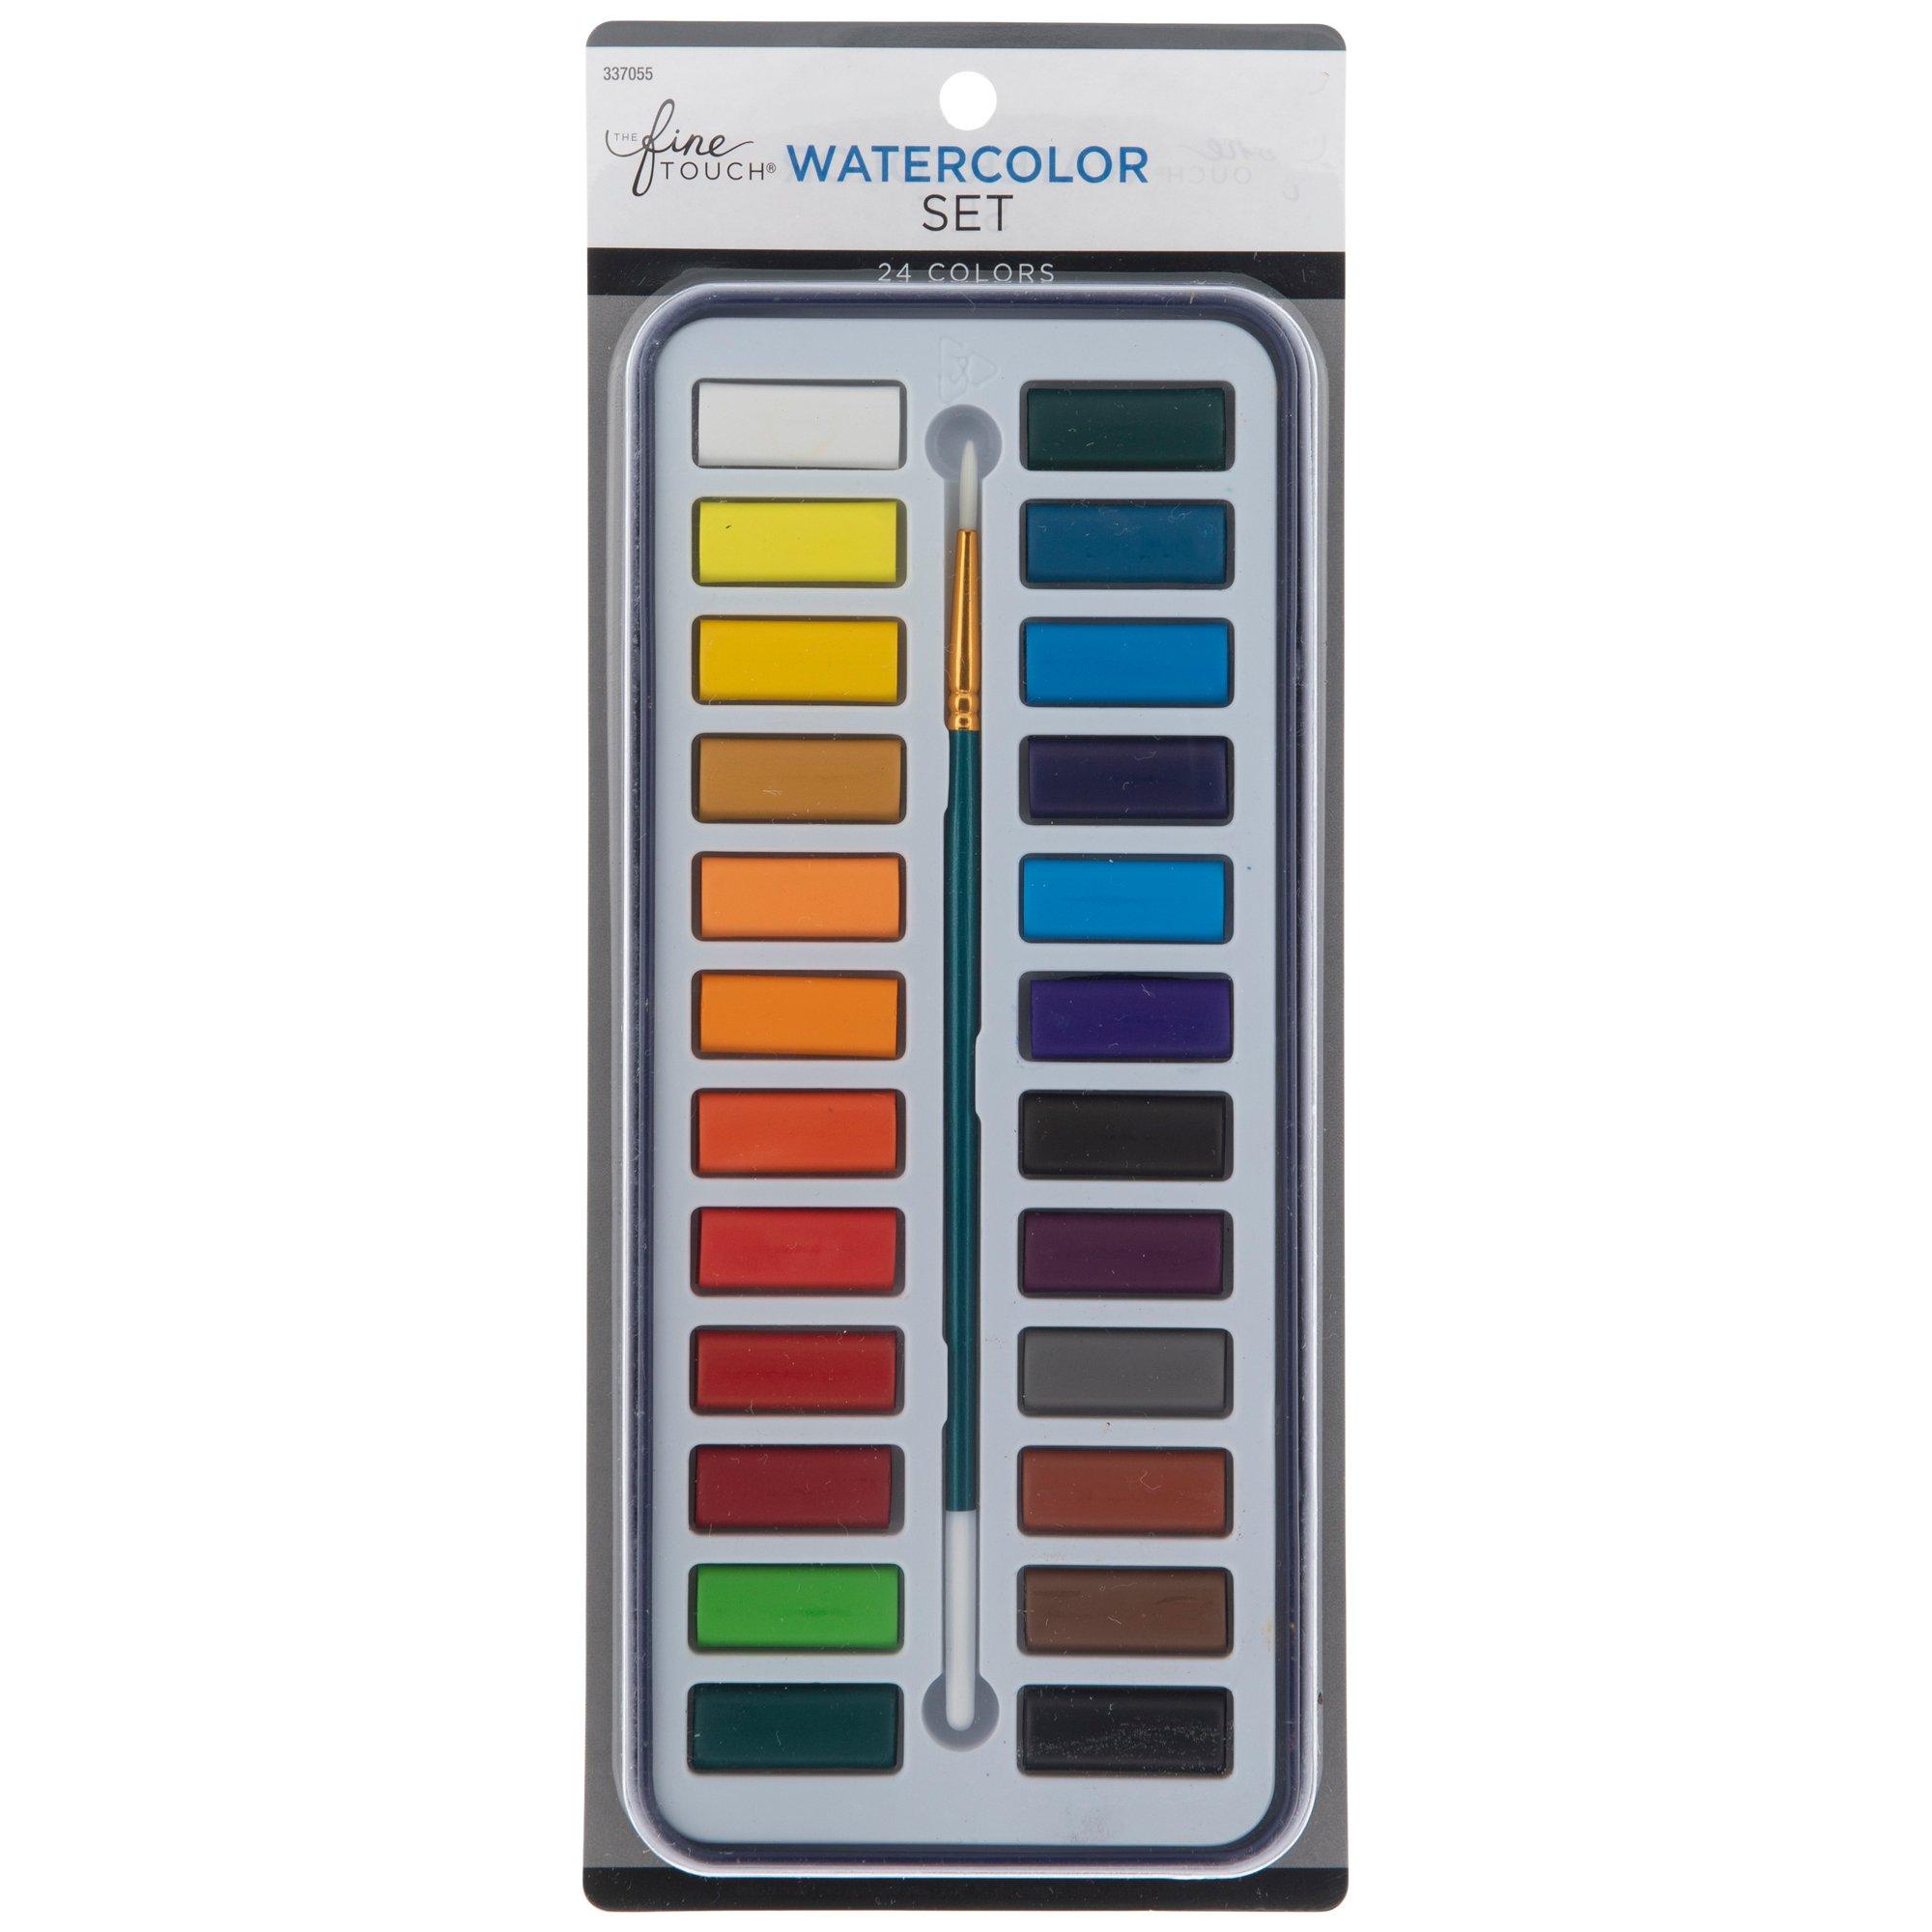 Master's Touch Metallic Watercolor Paint